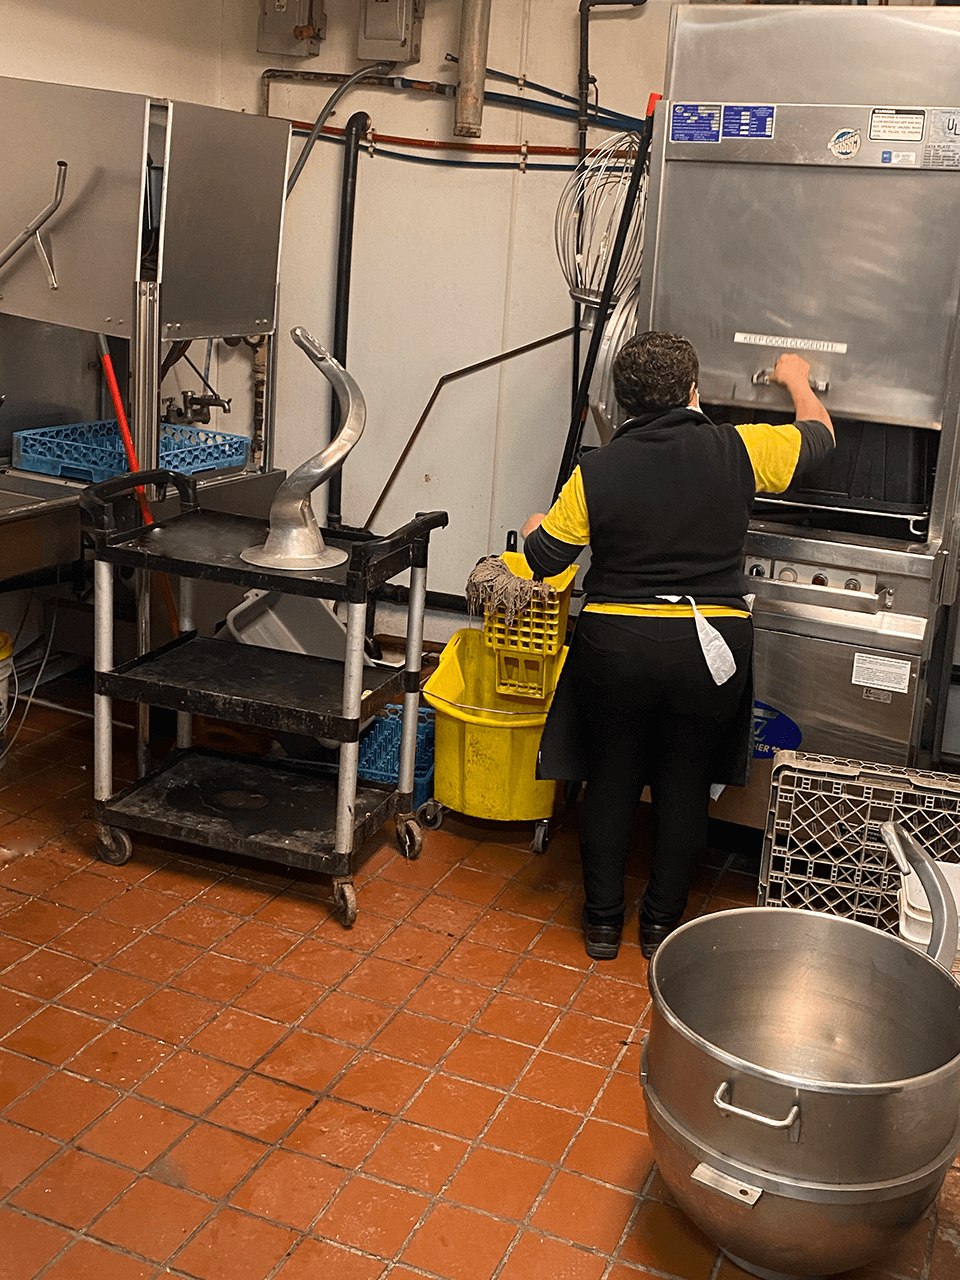 KBM-commissary-kitchen-seattle-23_1200x900.png